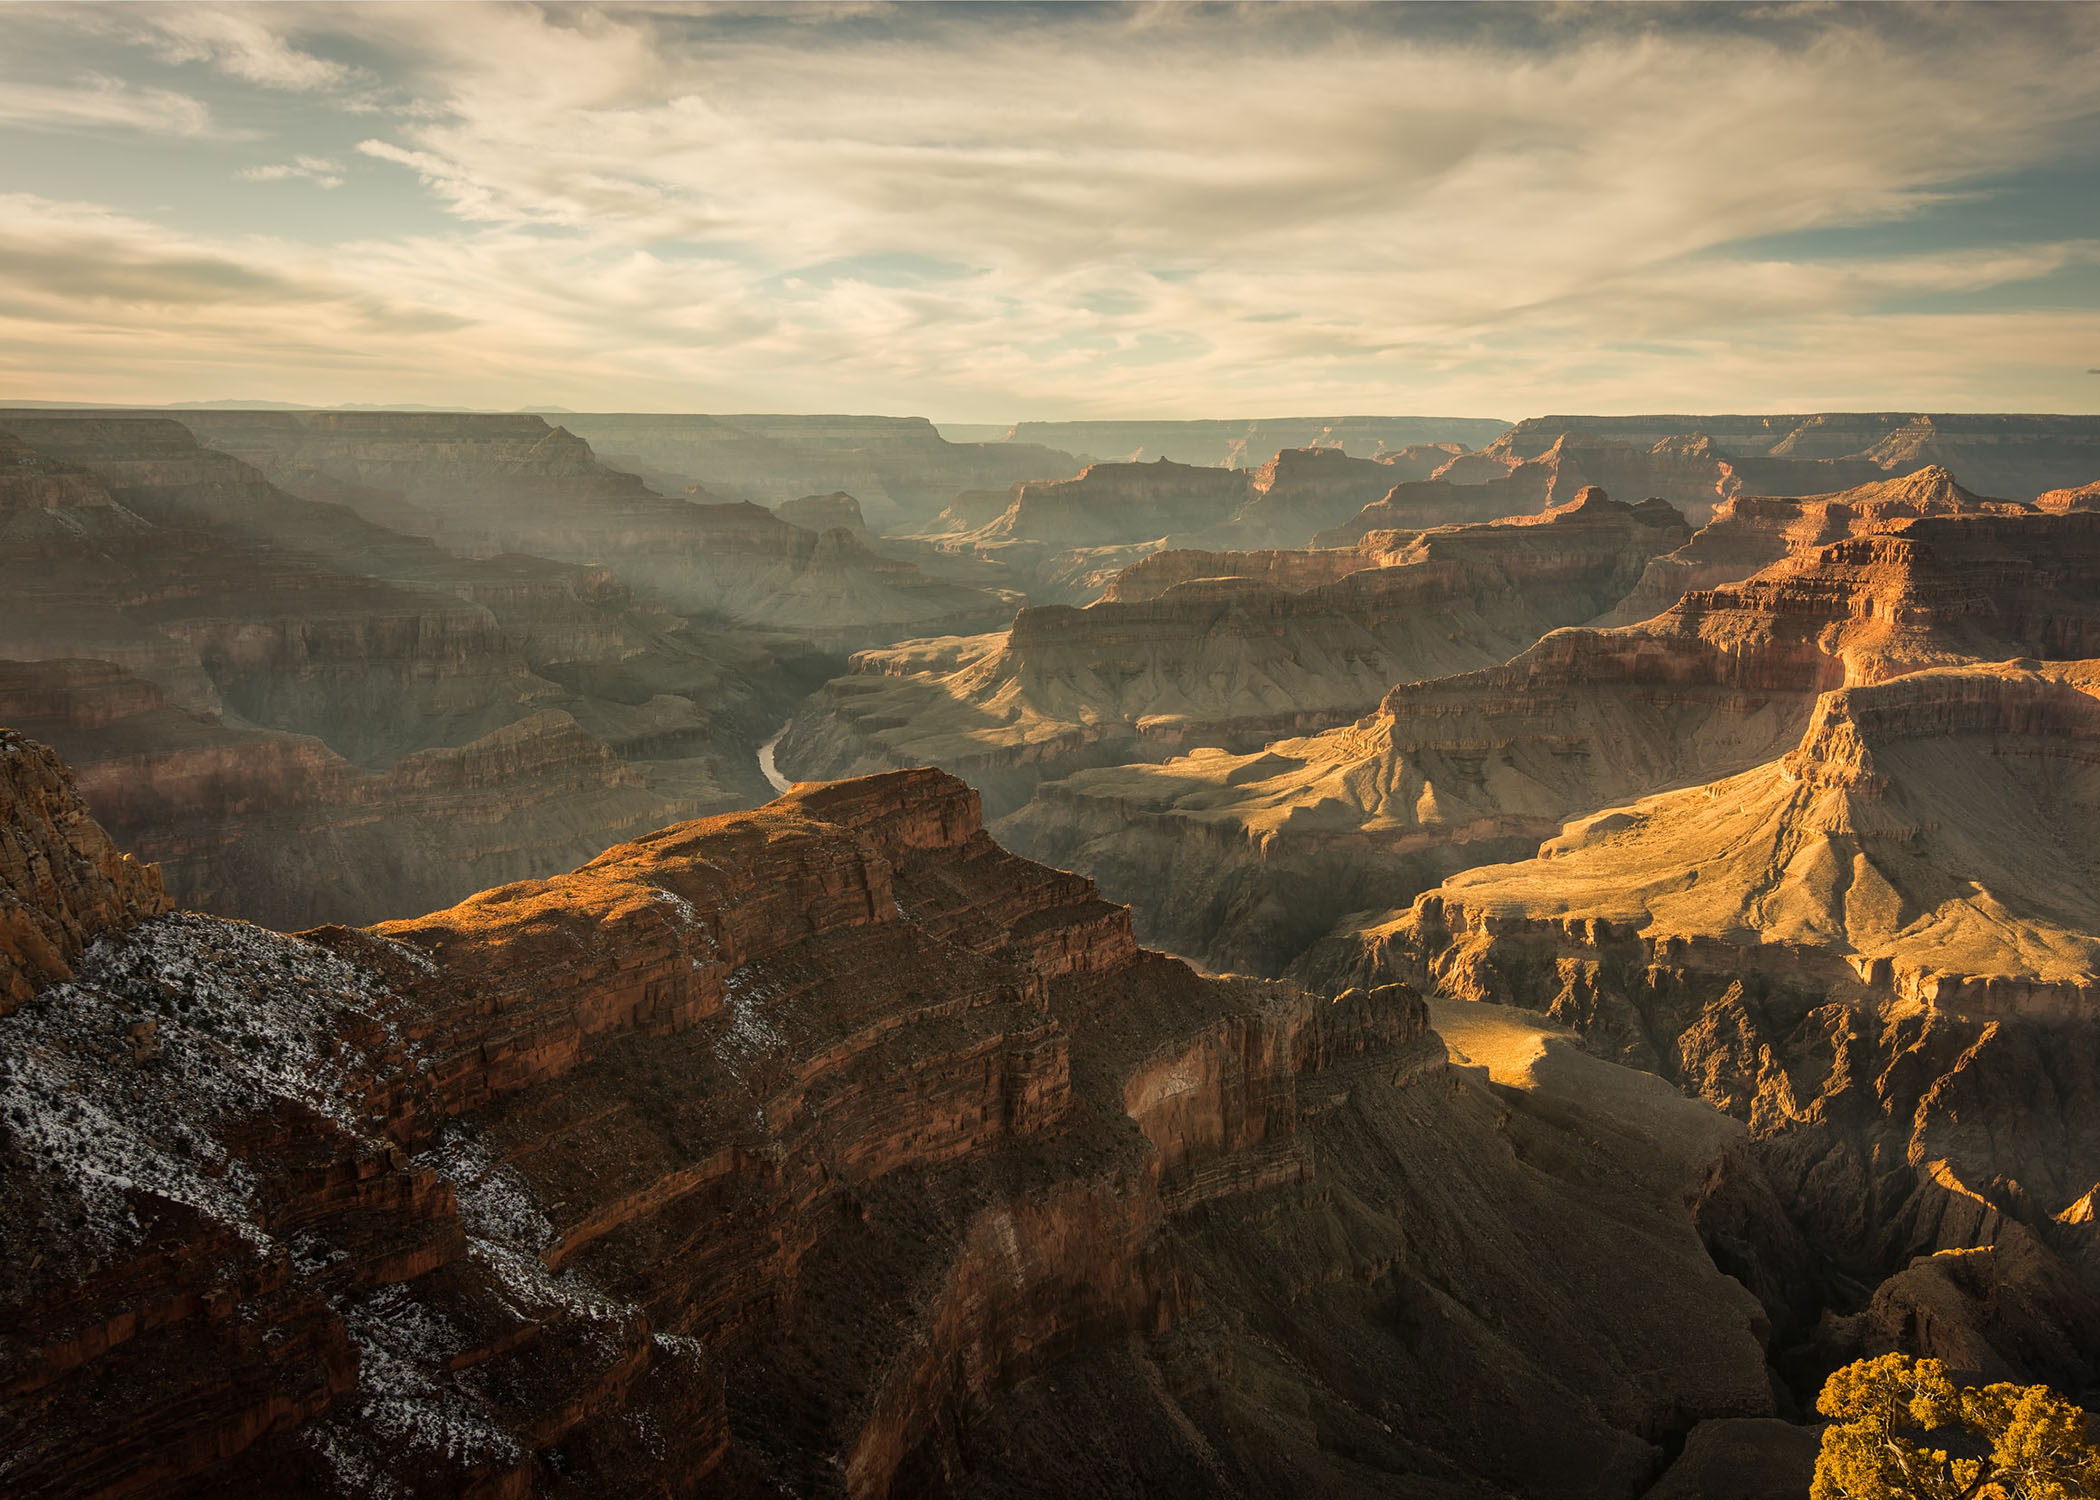 Scenic overlook in Grand Canyon National Park